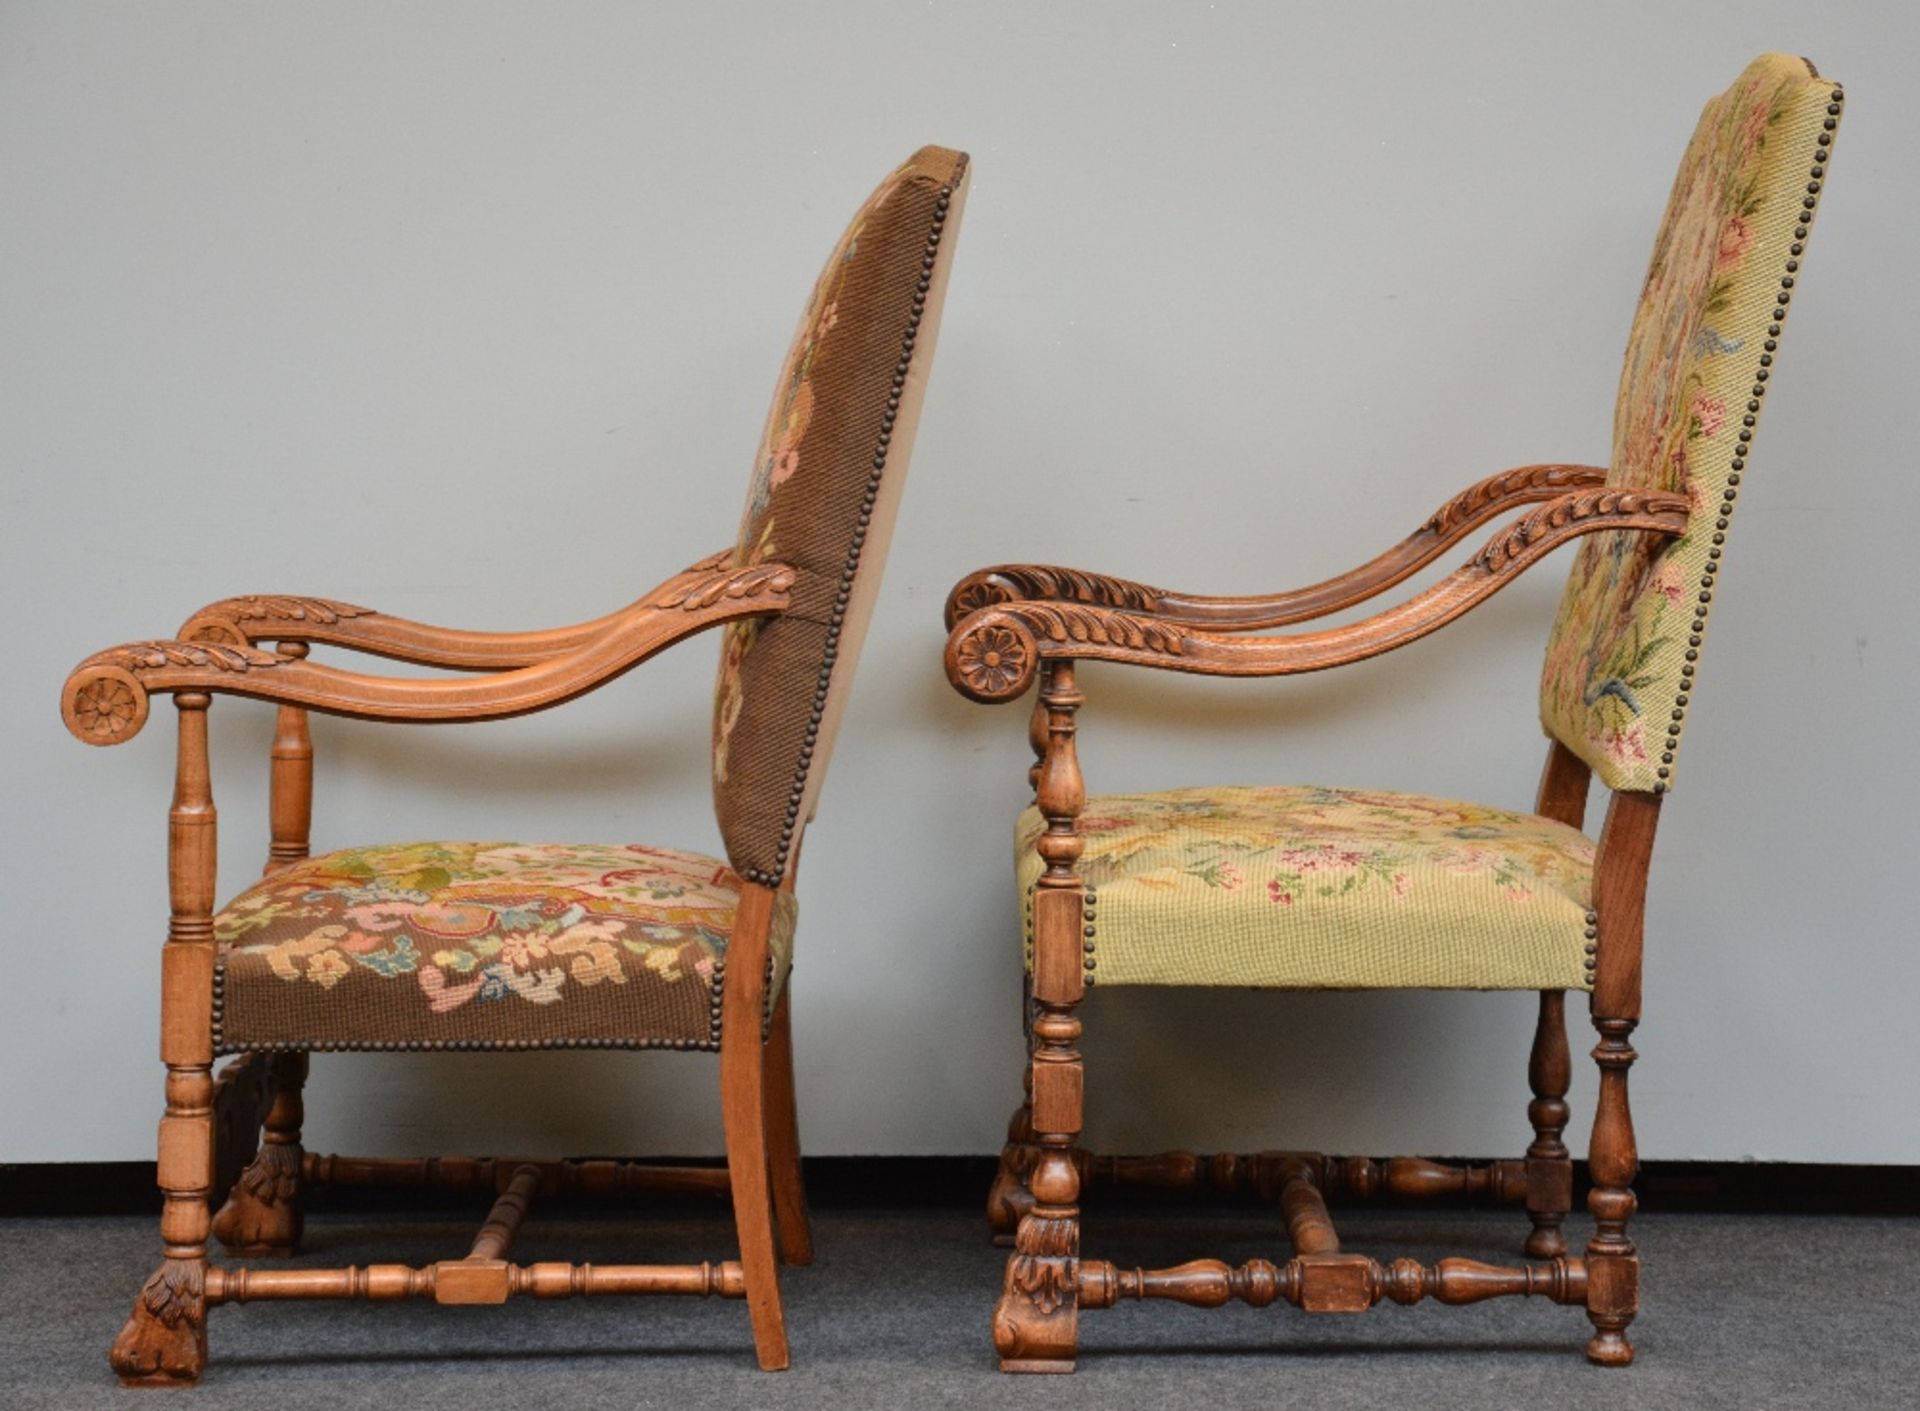 Two richly carved LXV-style armchairs with 'gros point' upholstery, H 111,5 / 119,5 - W 68 cm - Bild 2 aus 4